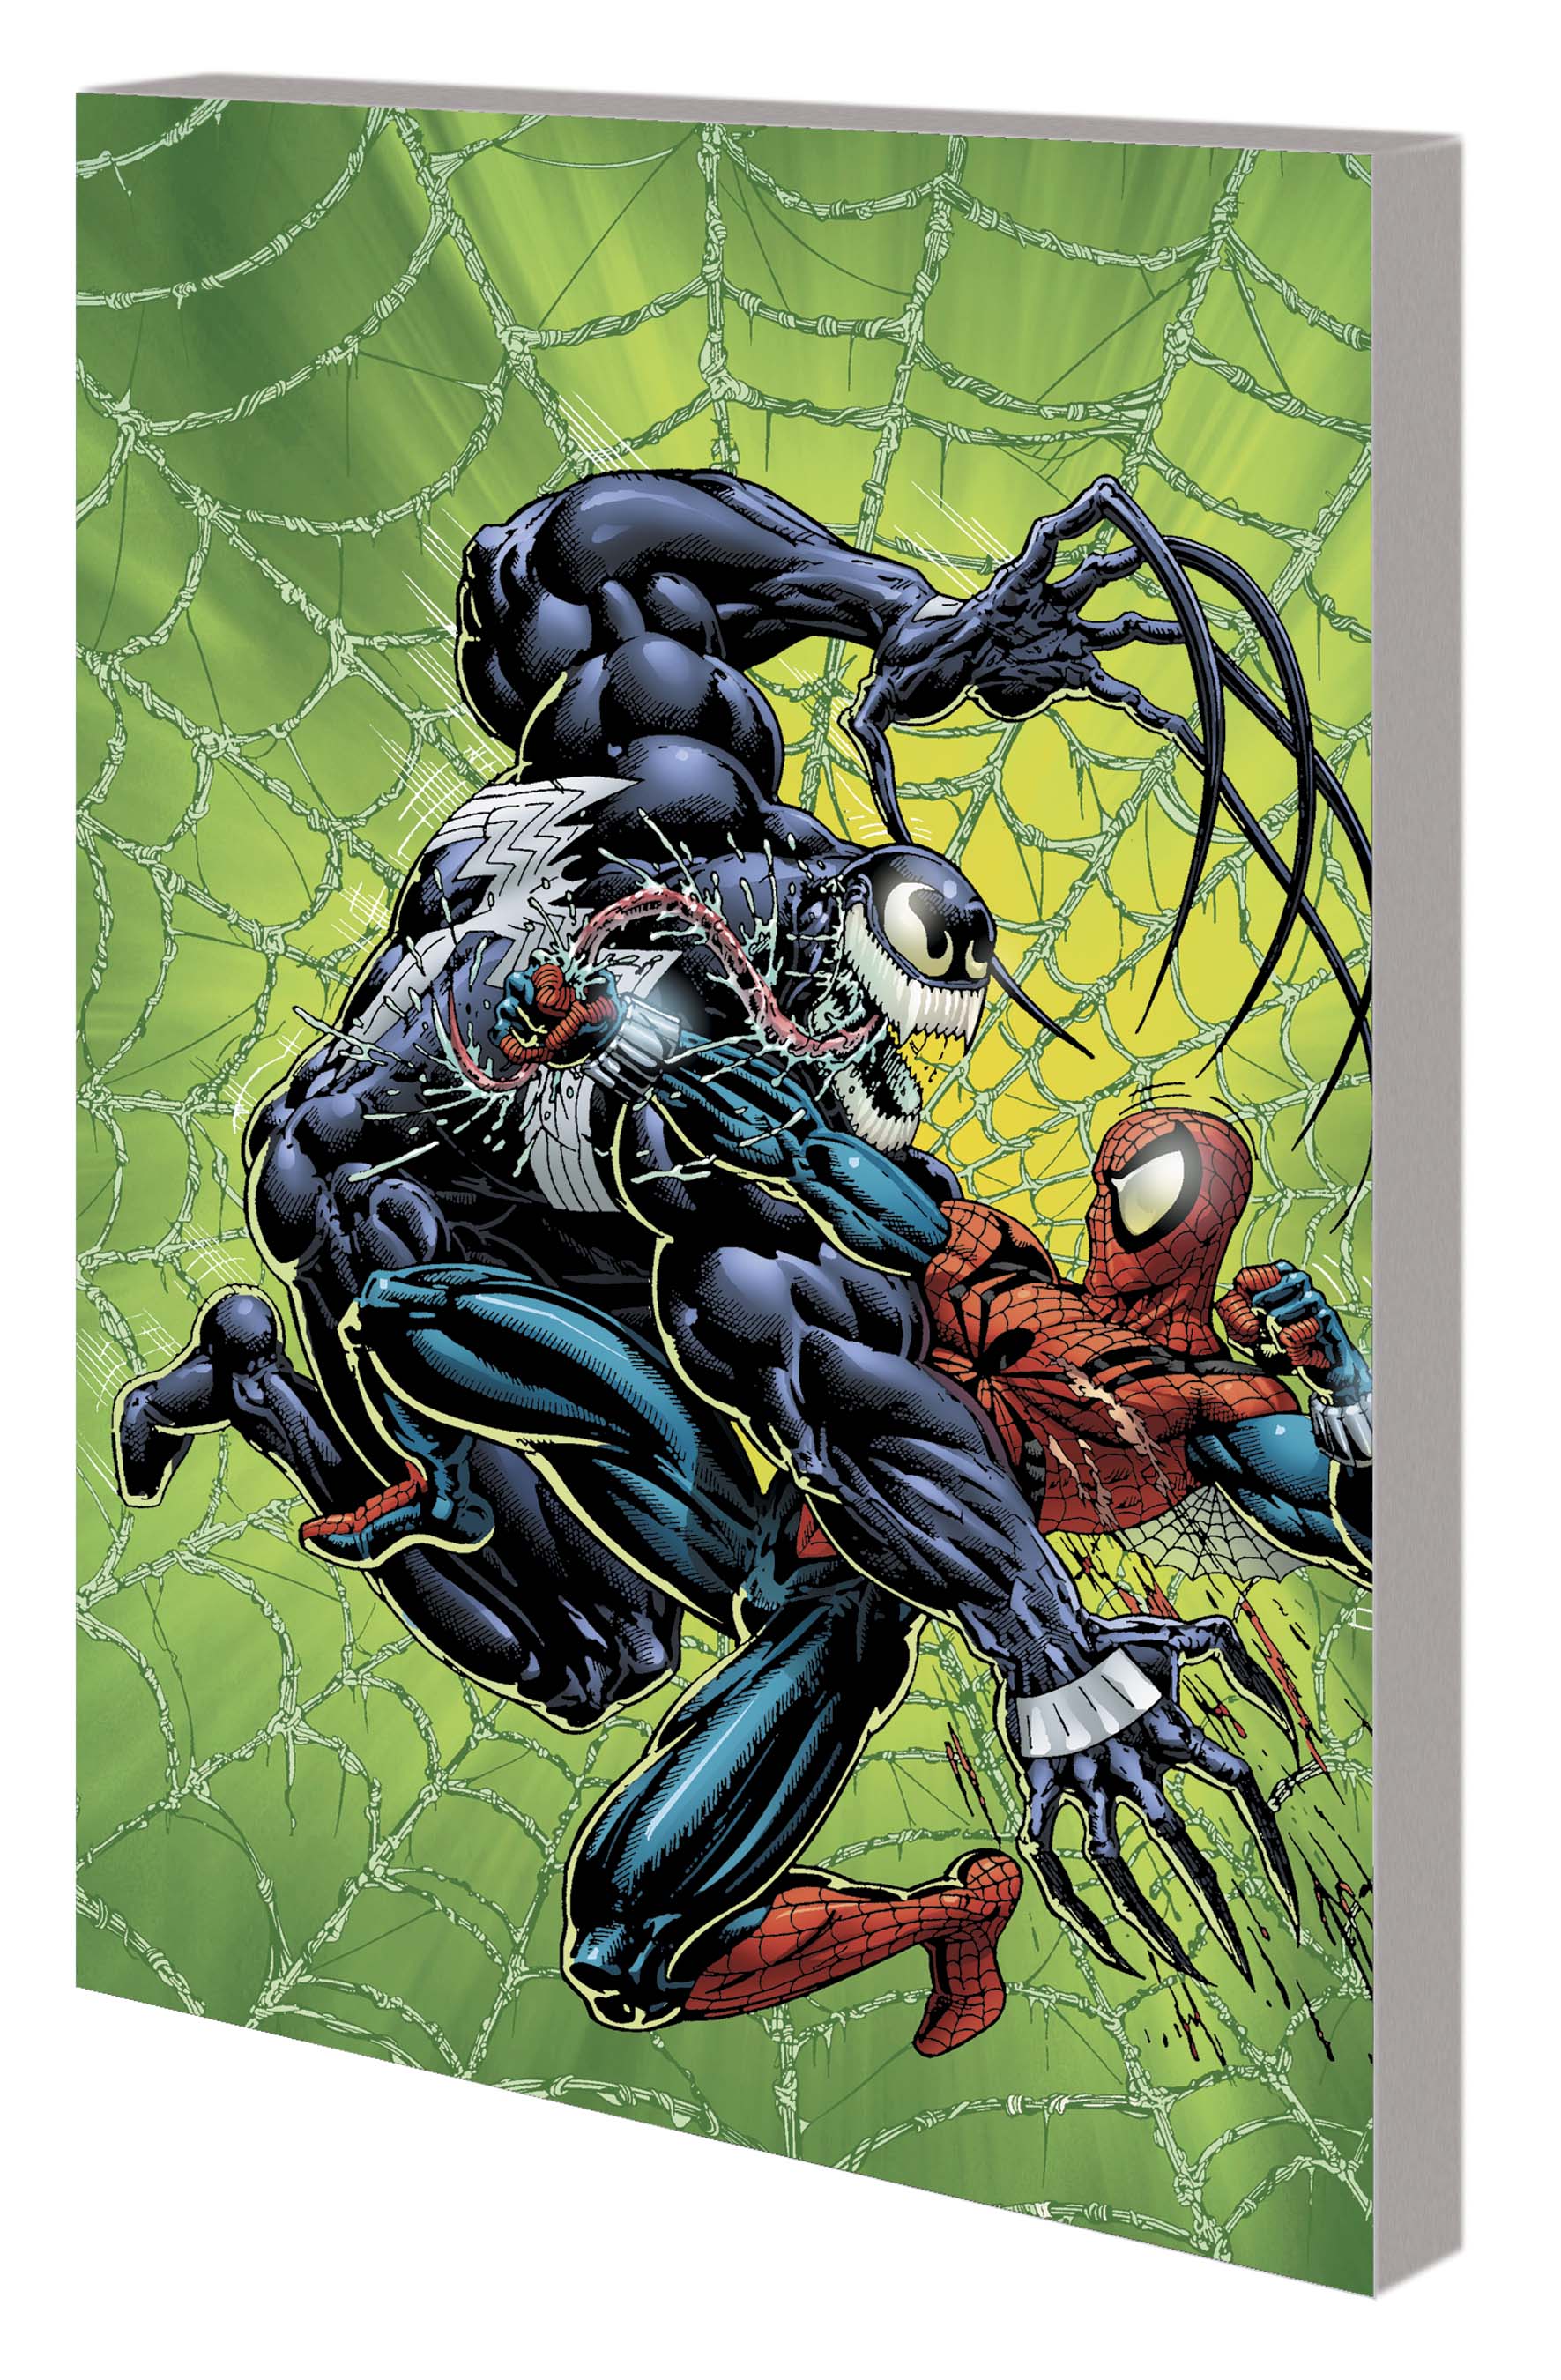 Spider-Man: The Complete Ben Reilly Epic Book 2 (Trade Paperback)